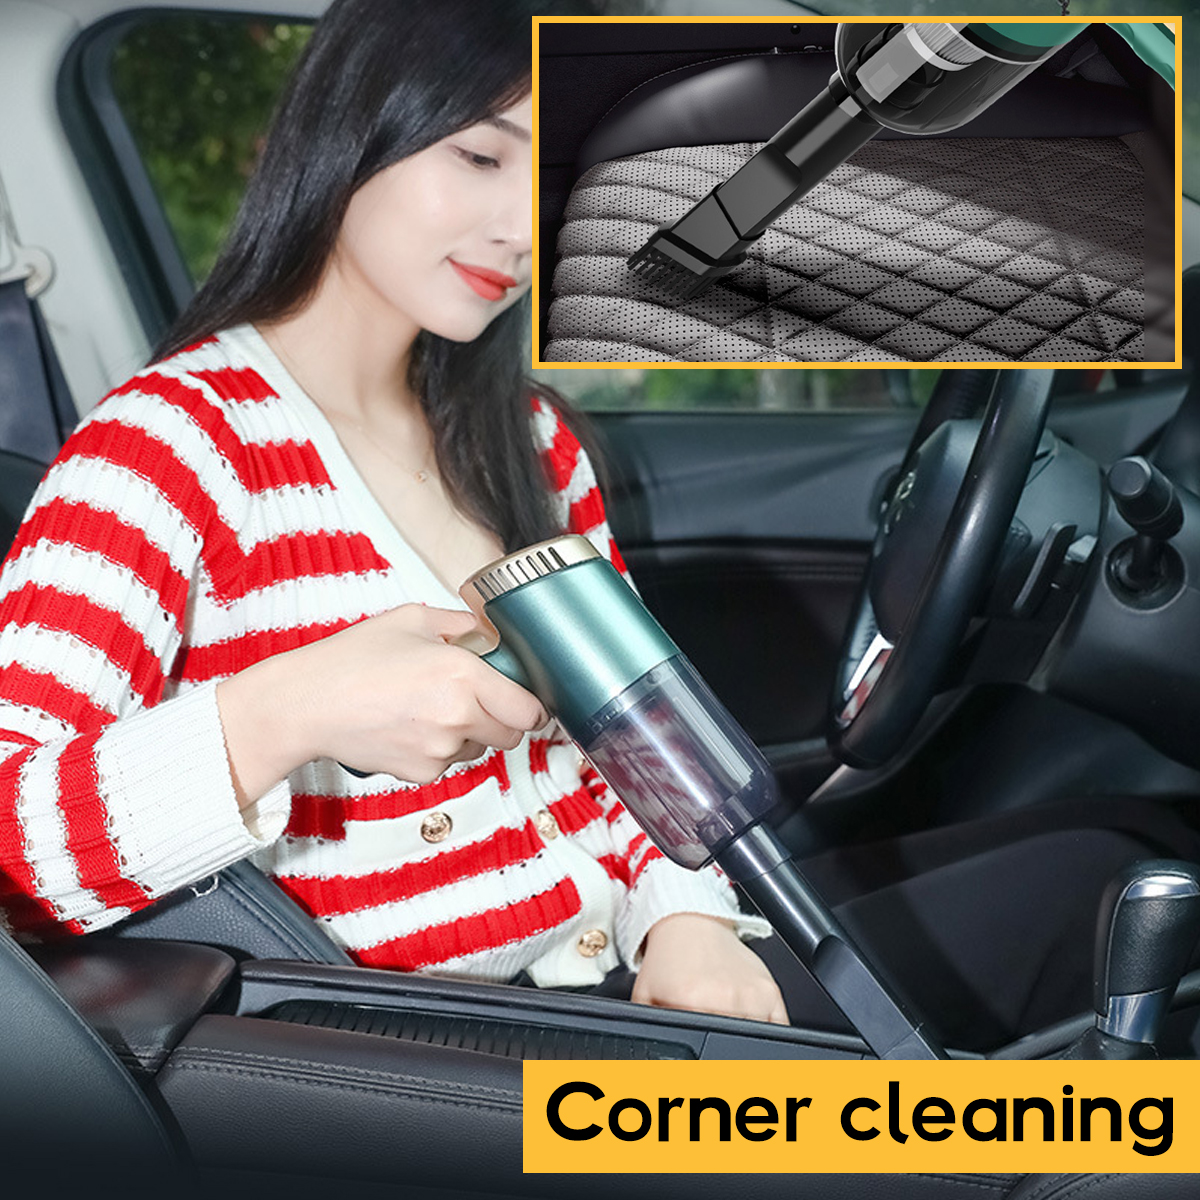 120W-9000PA-USB-Cordless-Hand-Held-Vacuum-Cleaner-Mini-Portable-Car-Auto-Home-Duster-1862707-8